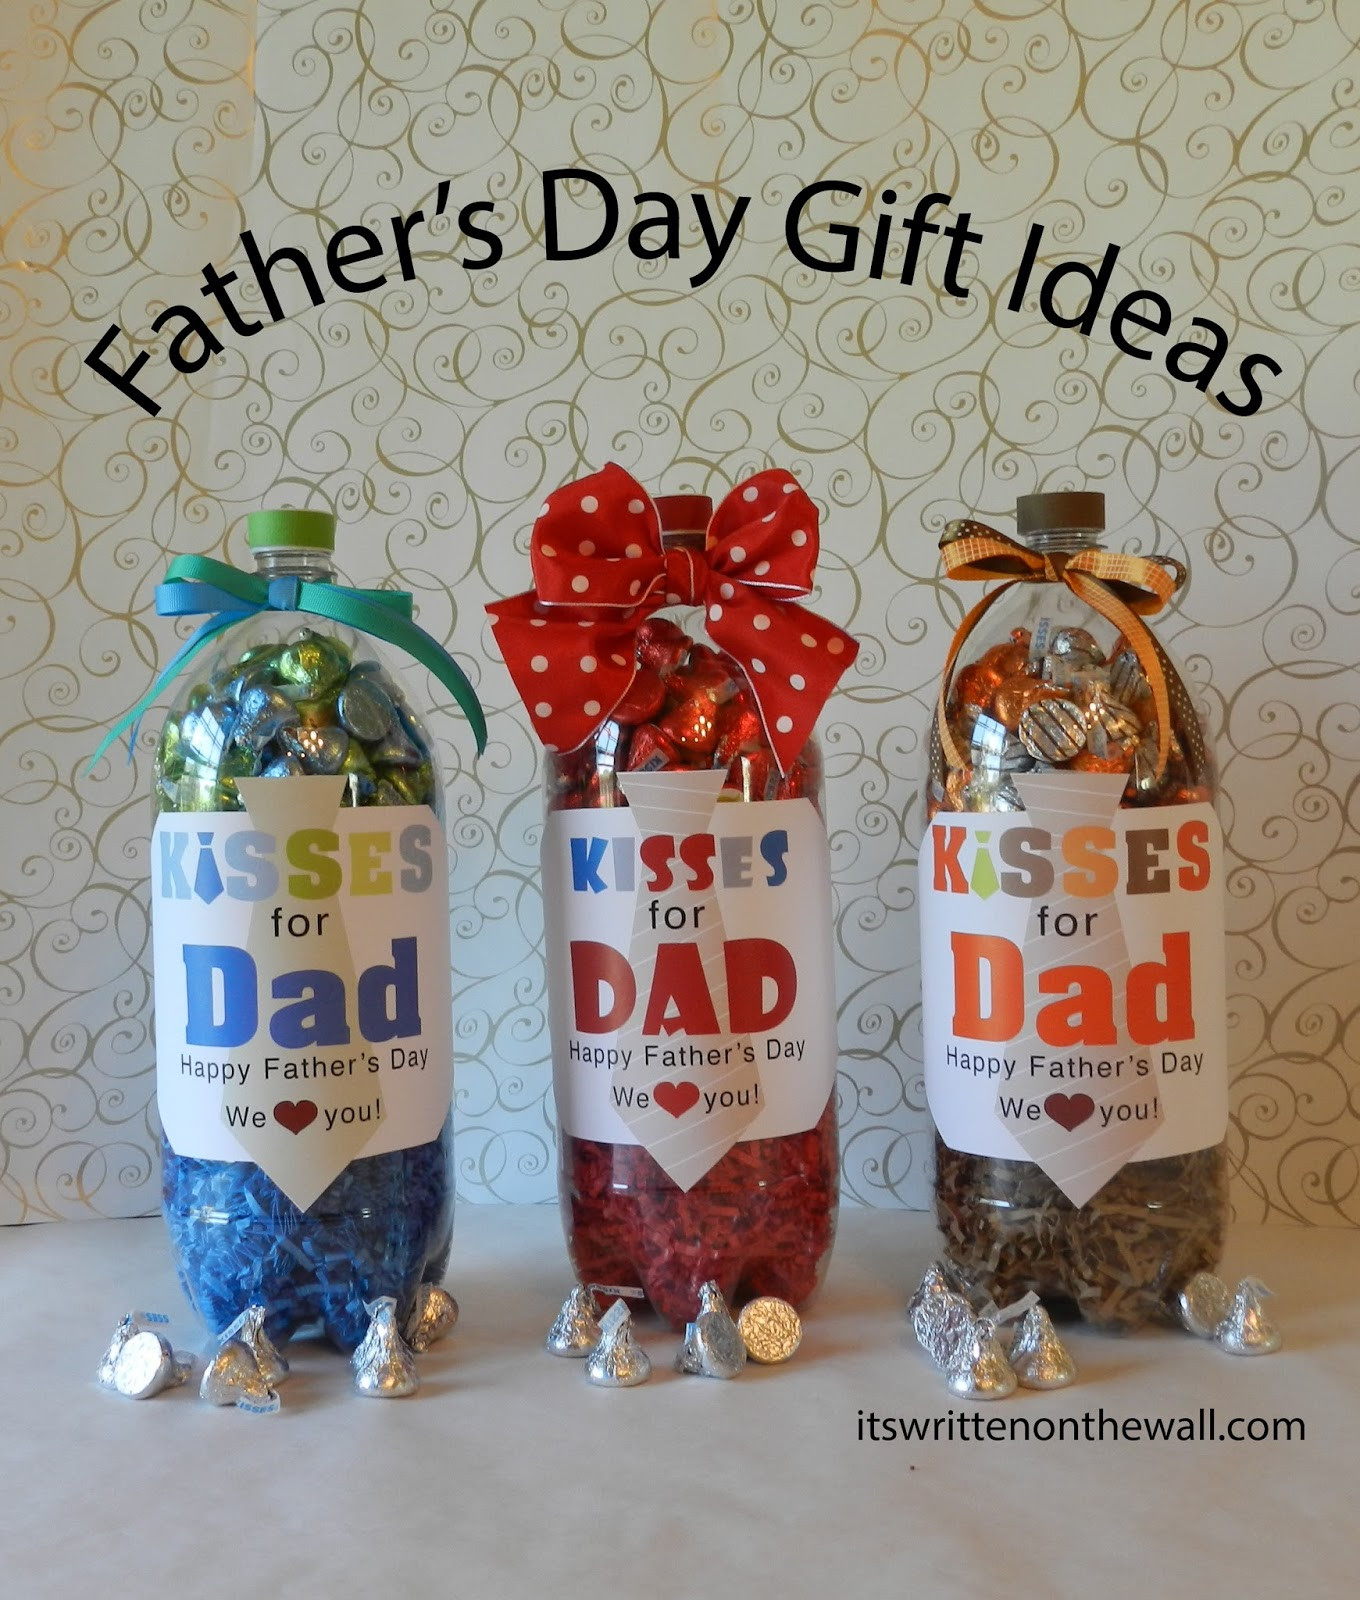 Fathers Day Gift From Toddlers
 It s Written on the Wall Fathers Day Gift Ideas For the